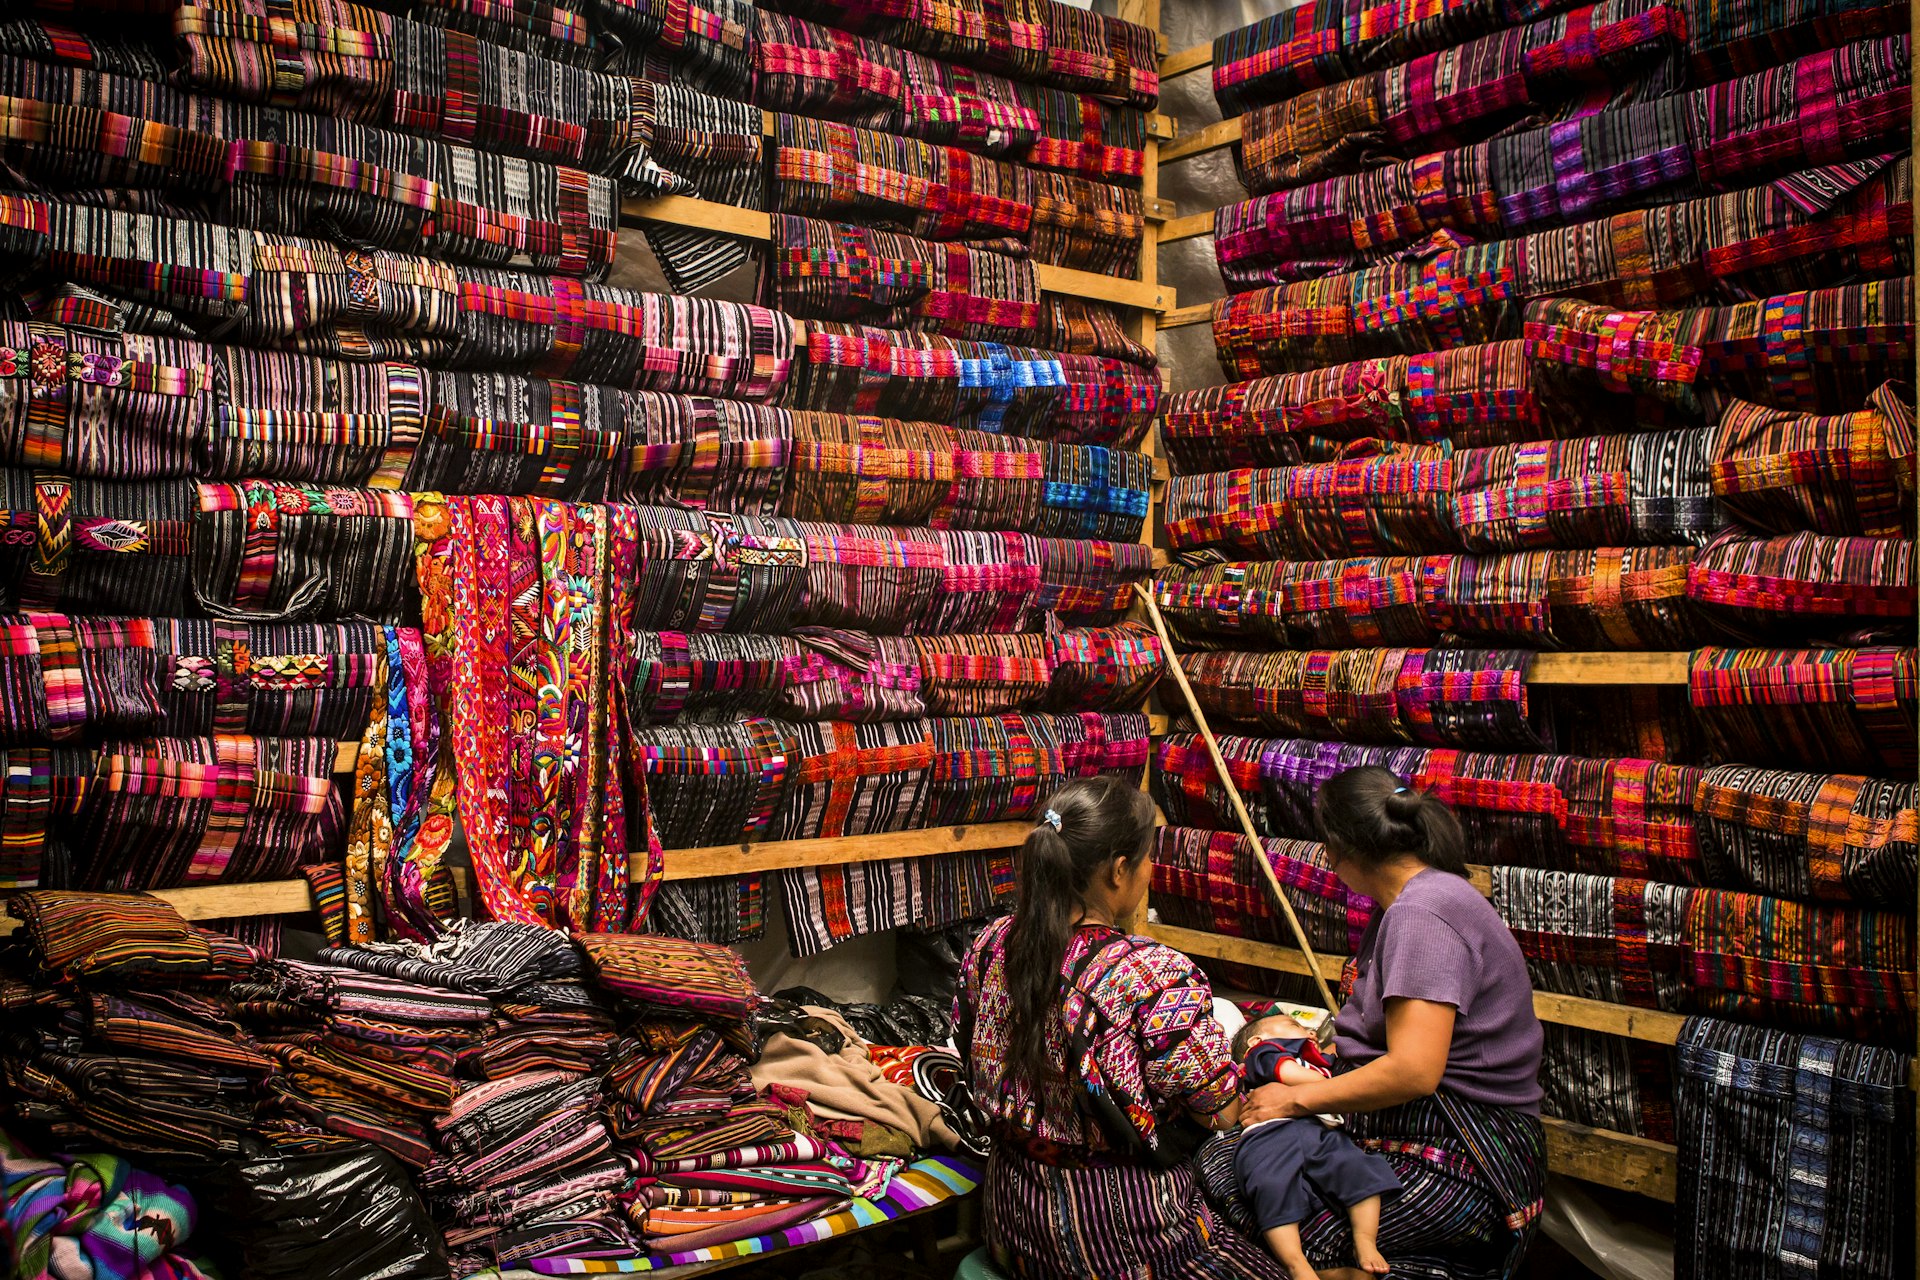 Two women sit in a vendor stall covered in colorful textiles in Chichicastenango, Guatemala